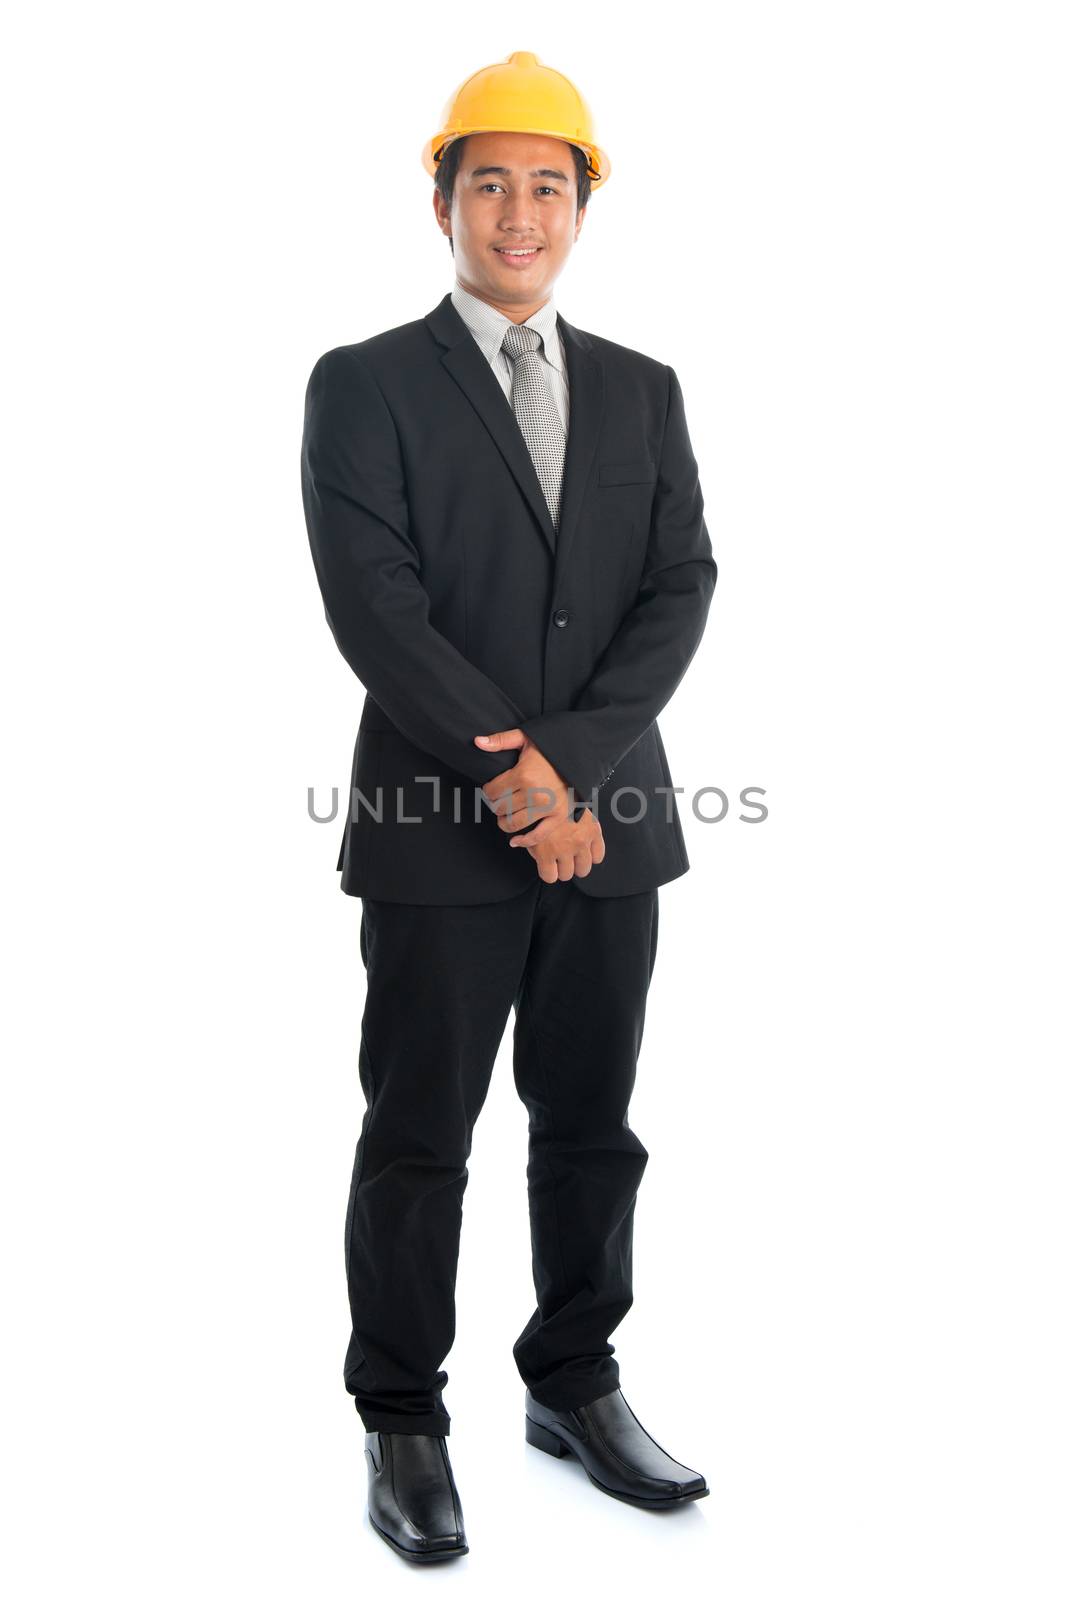 Portrait of full body attractive Southeast Asian engineer with yellow hard hat smiling, standing isolated on white background.